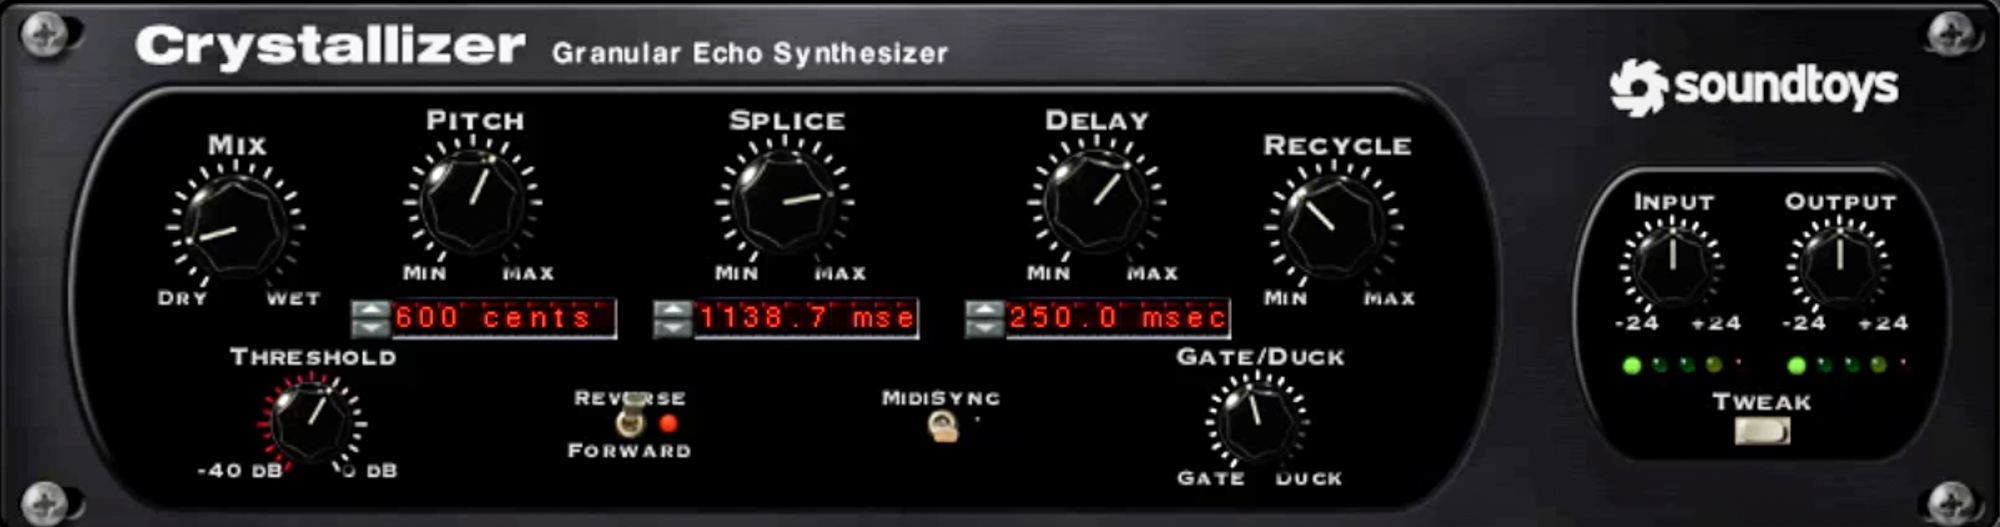 10 Popular Reverb and Delay Plugins Not Based on Analog Gear